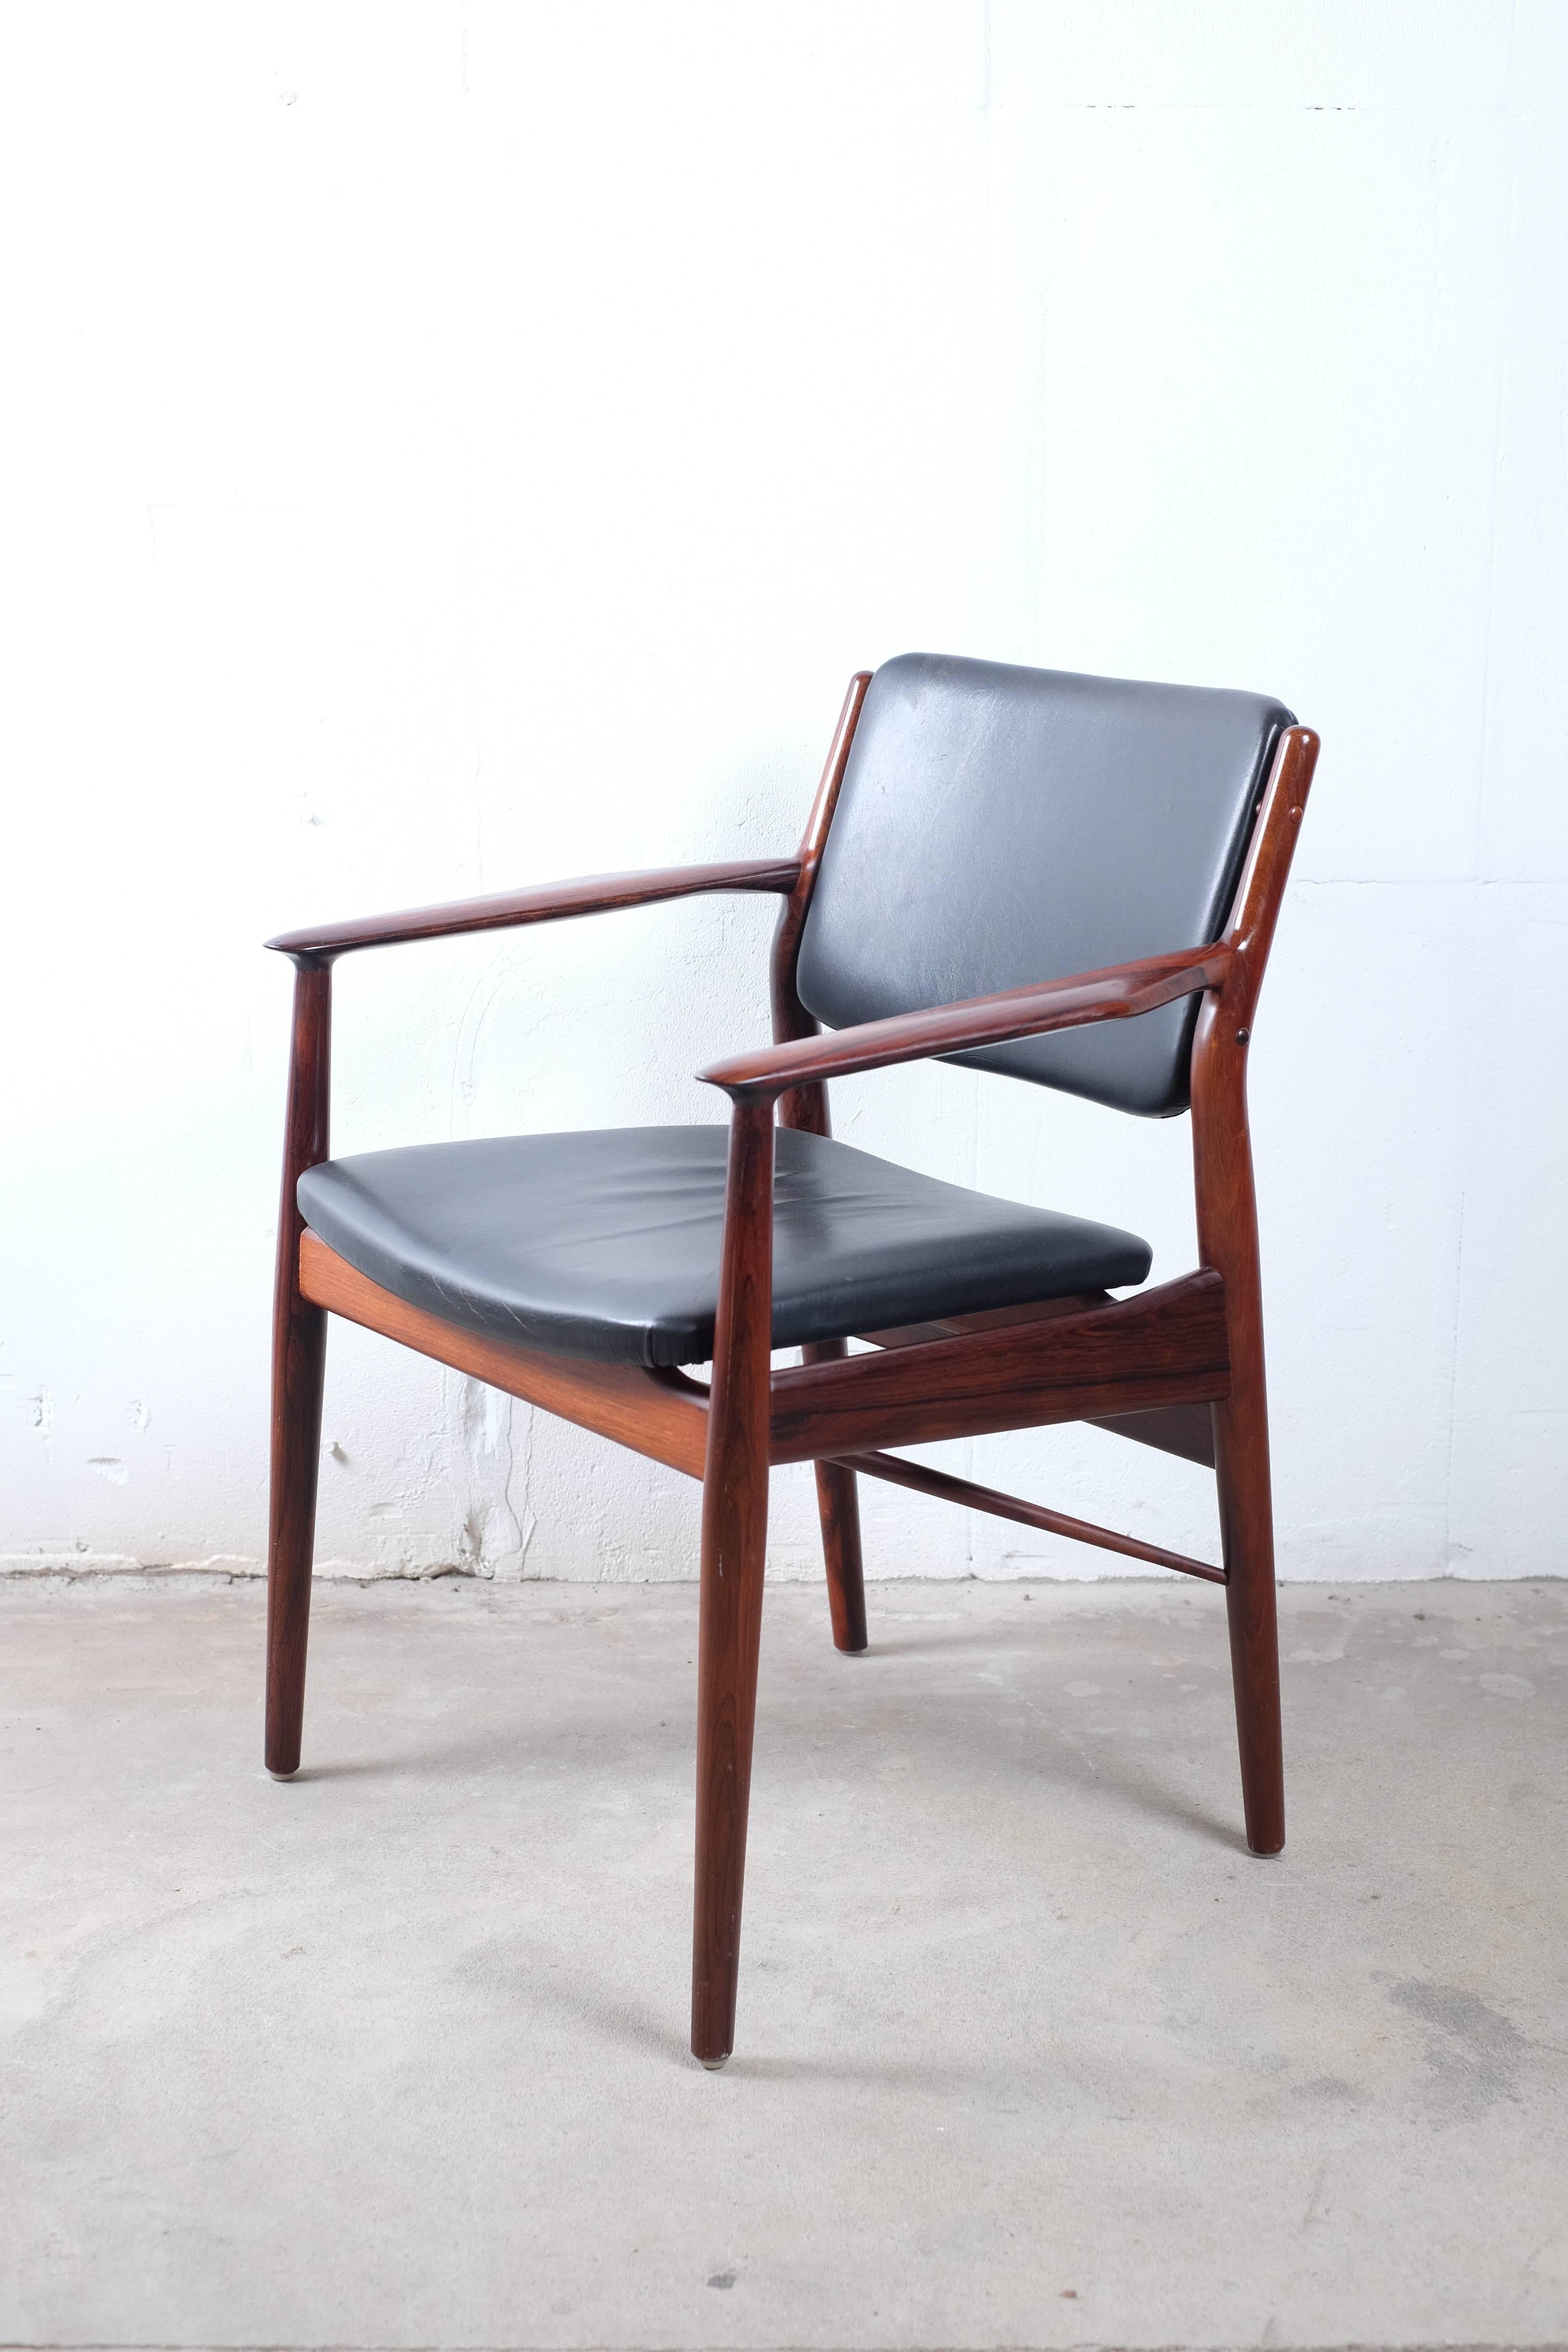 This amazing armchair is made of solid rosewood with black leather on seat and back. Very good seating comfort and is suitable as a desk chair or for the table end. 

The chair has a great expression that exudes quality and design. Small signs of